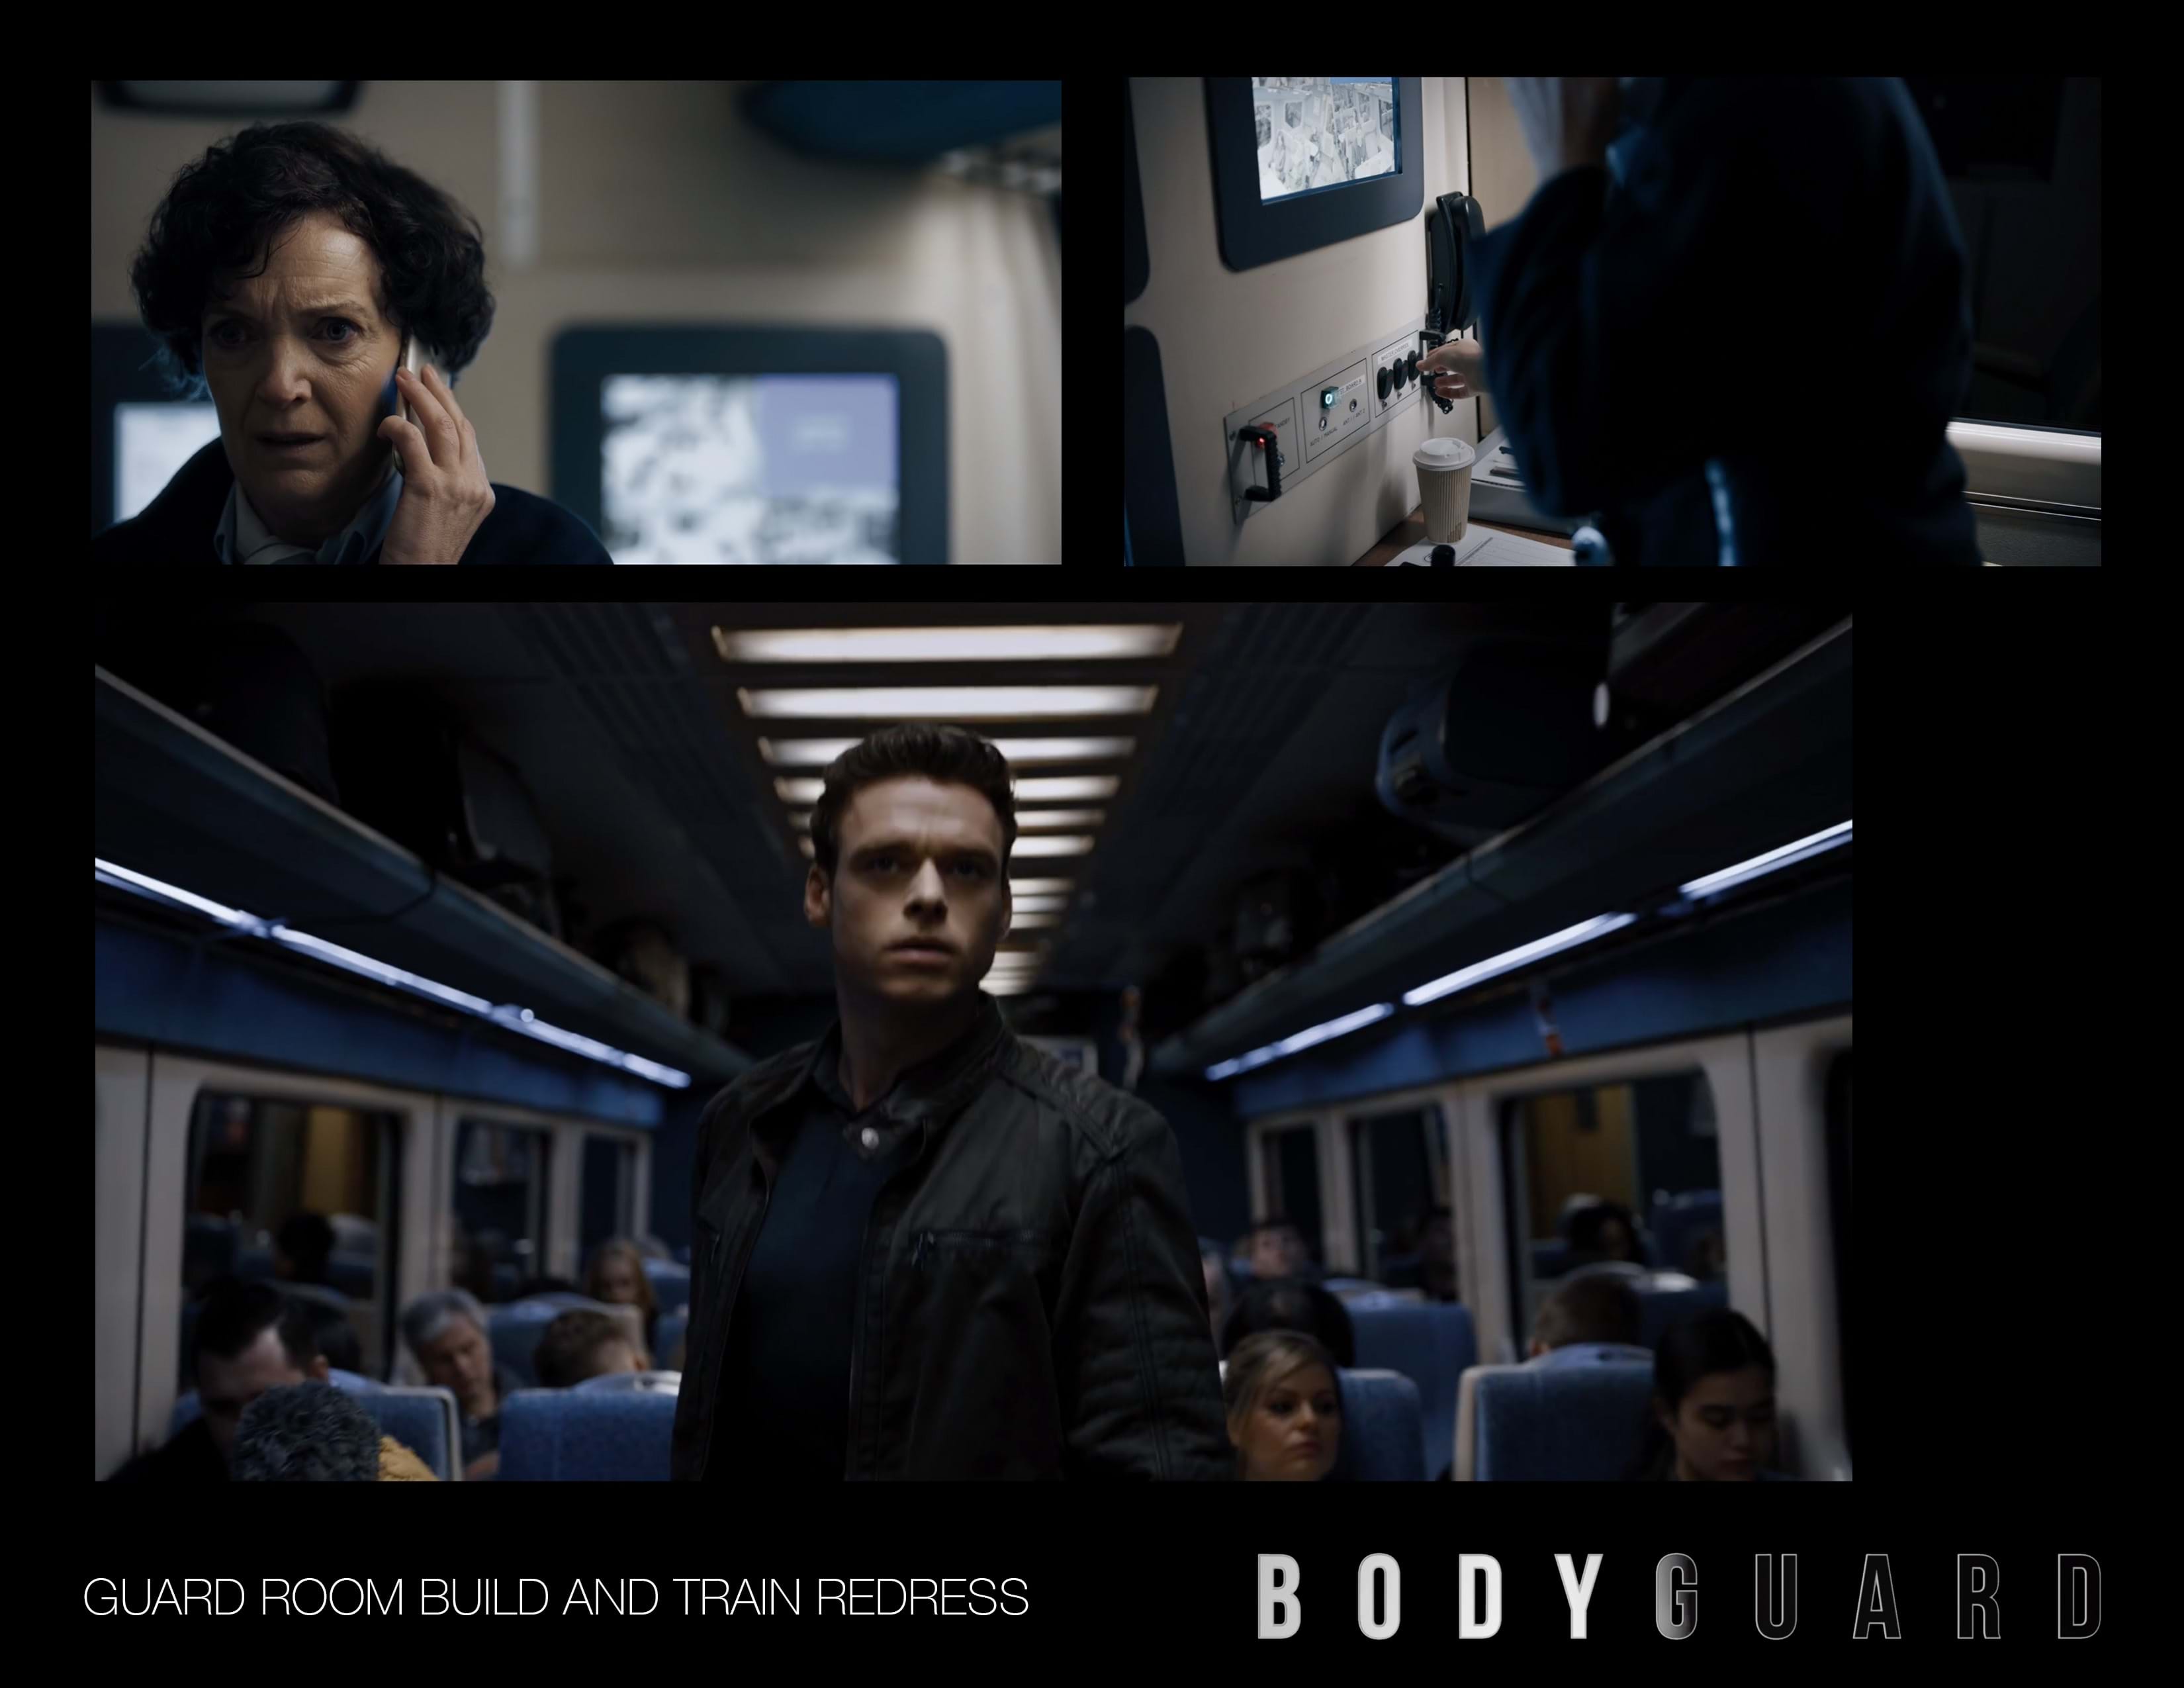 A collection of photos from the TV show Bodyguard